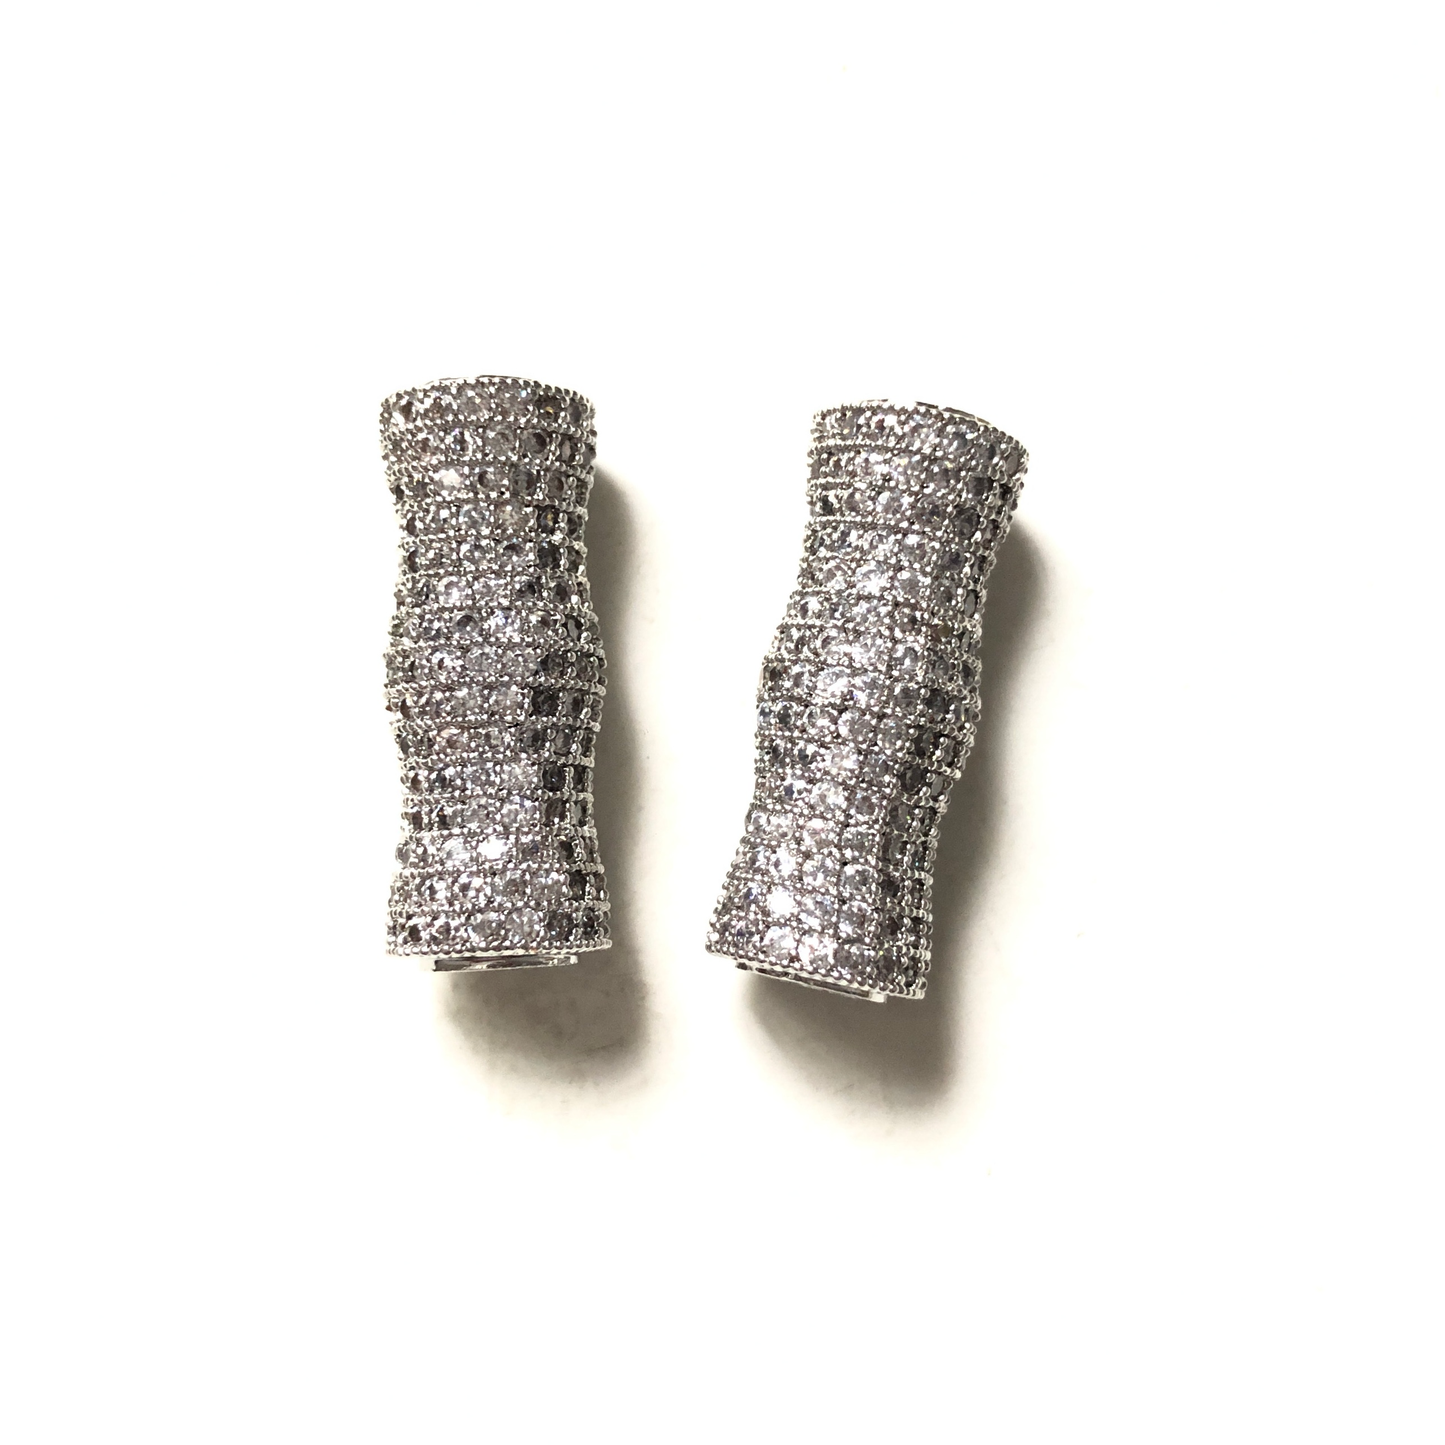 5-10pcs/lot 27.5*10mm CZ Paved Wave Tube Bar Spacers Silver CZ Paved Spacers Tube Bar Centerpieces Charms Beads Beyond